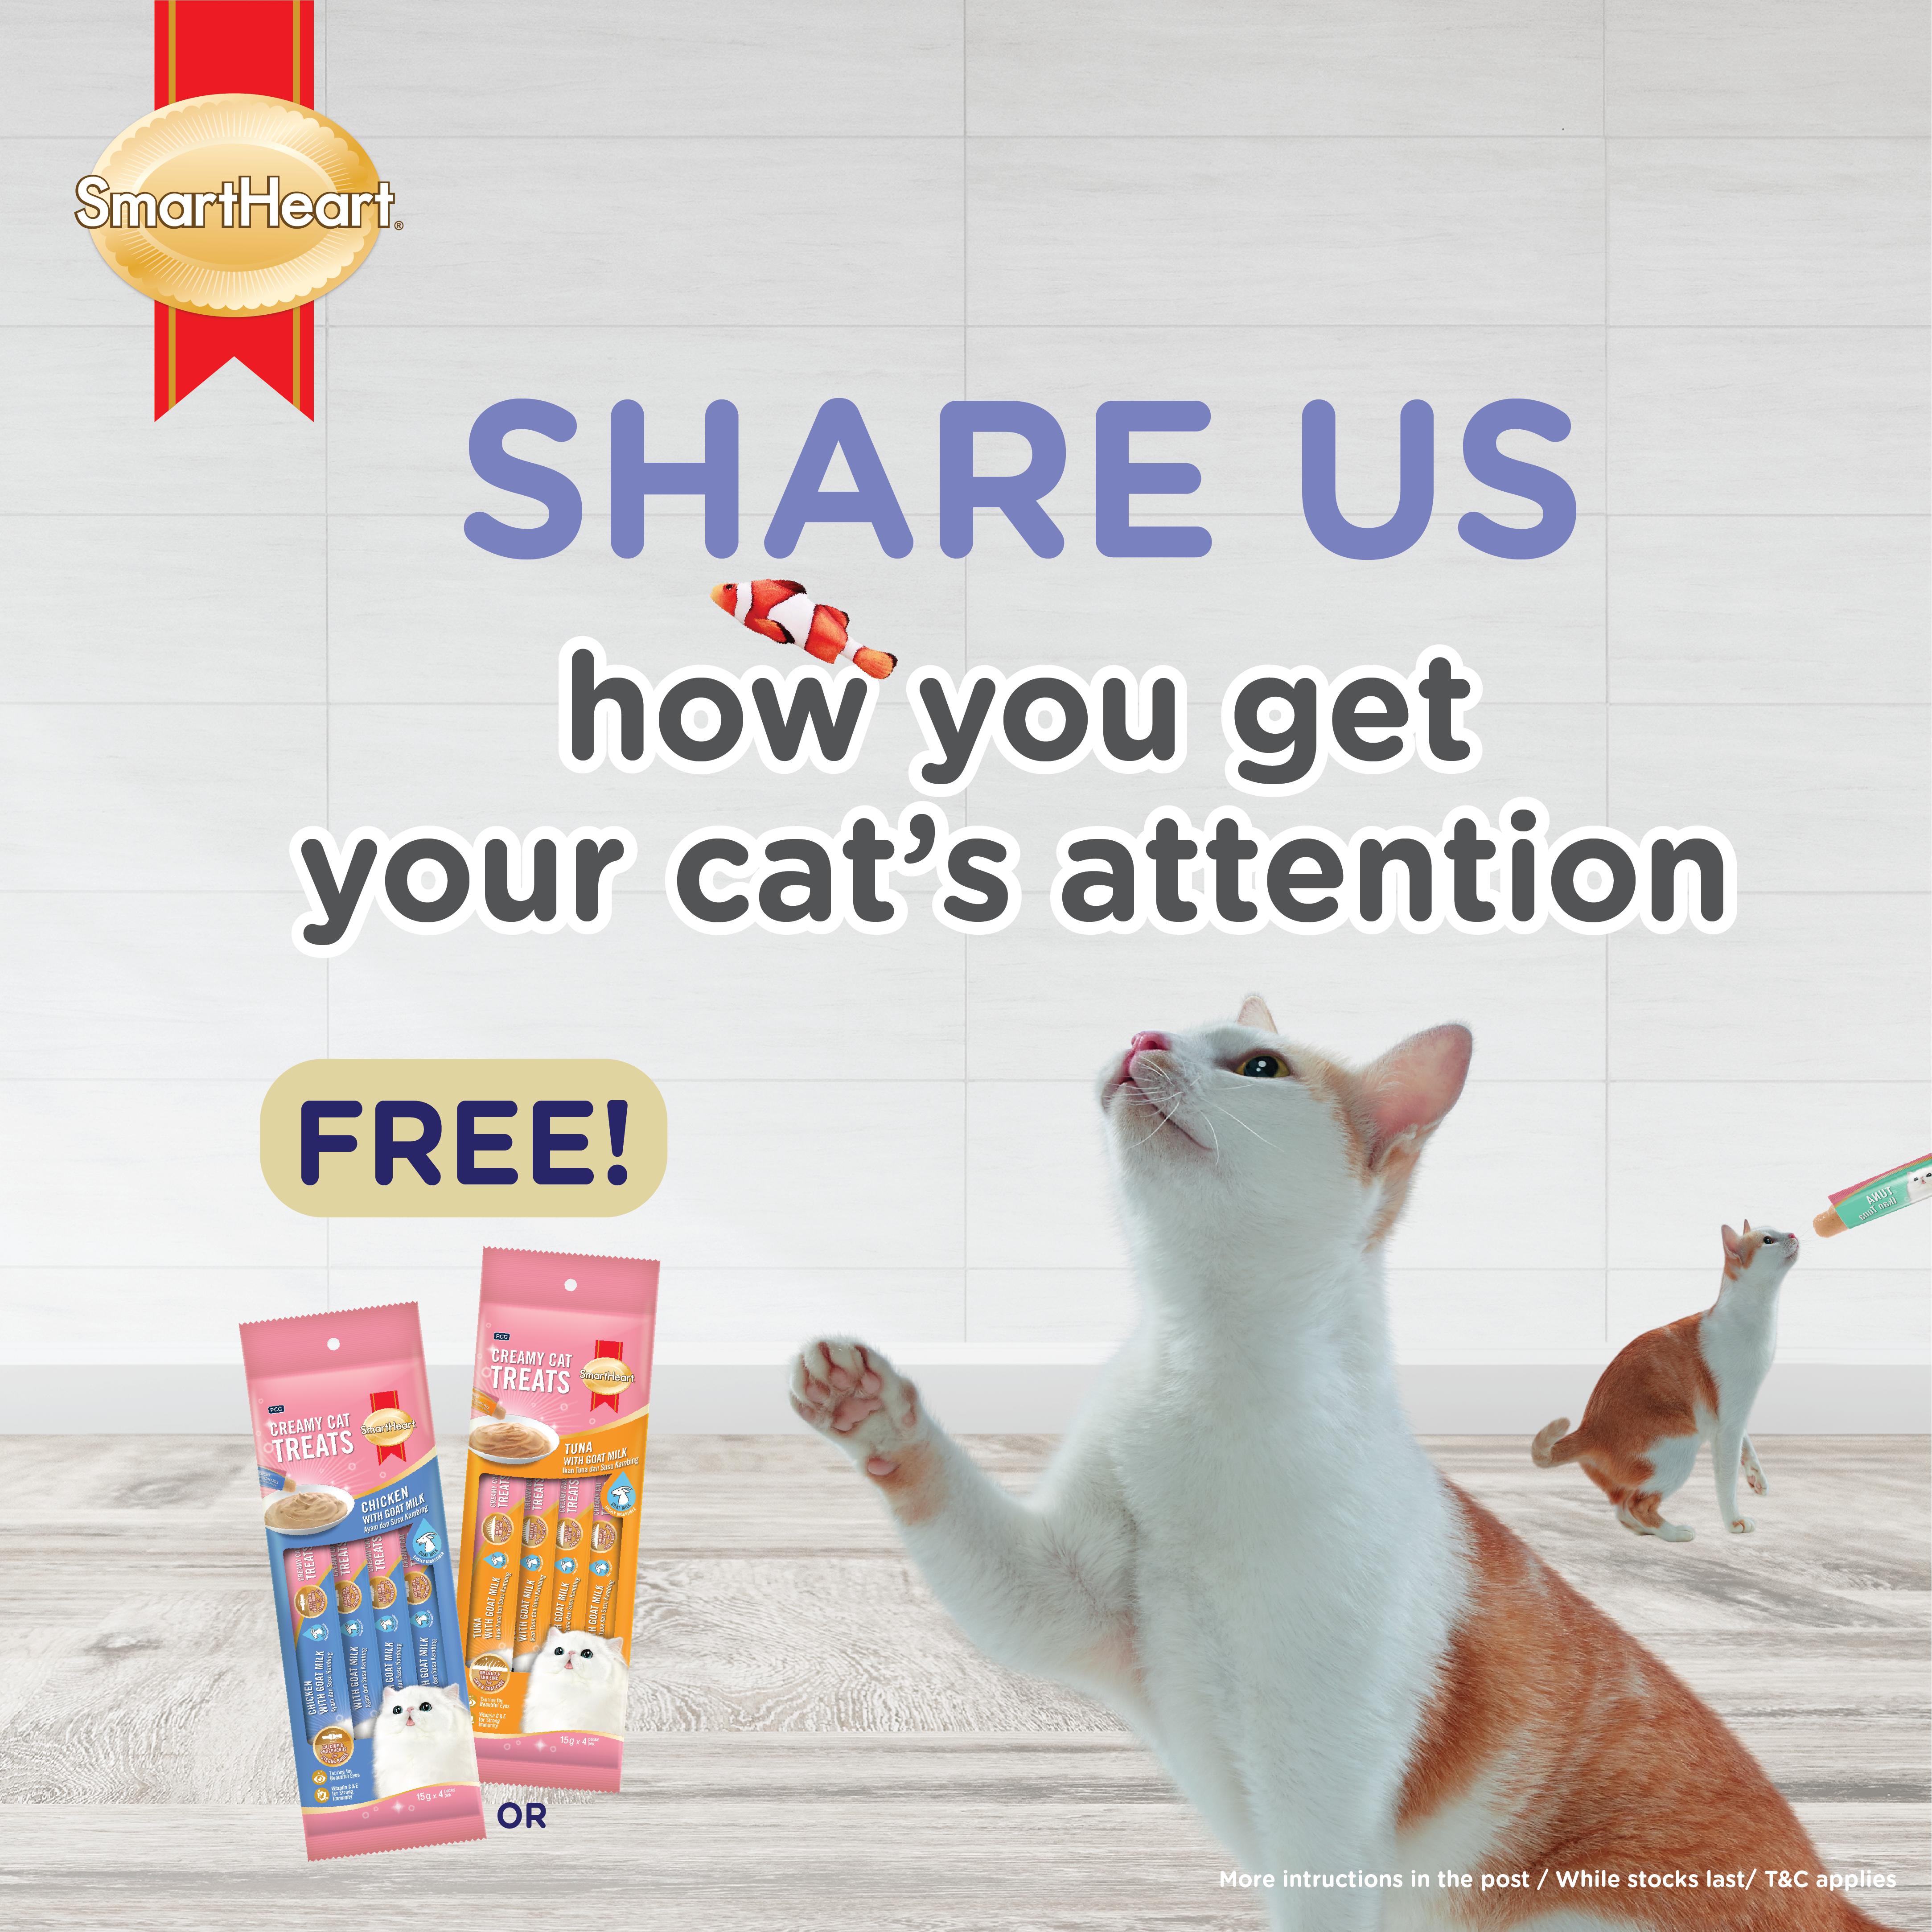 Giveaway: How to get cat’s attention